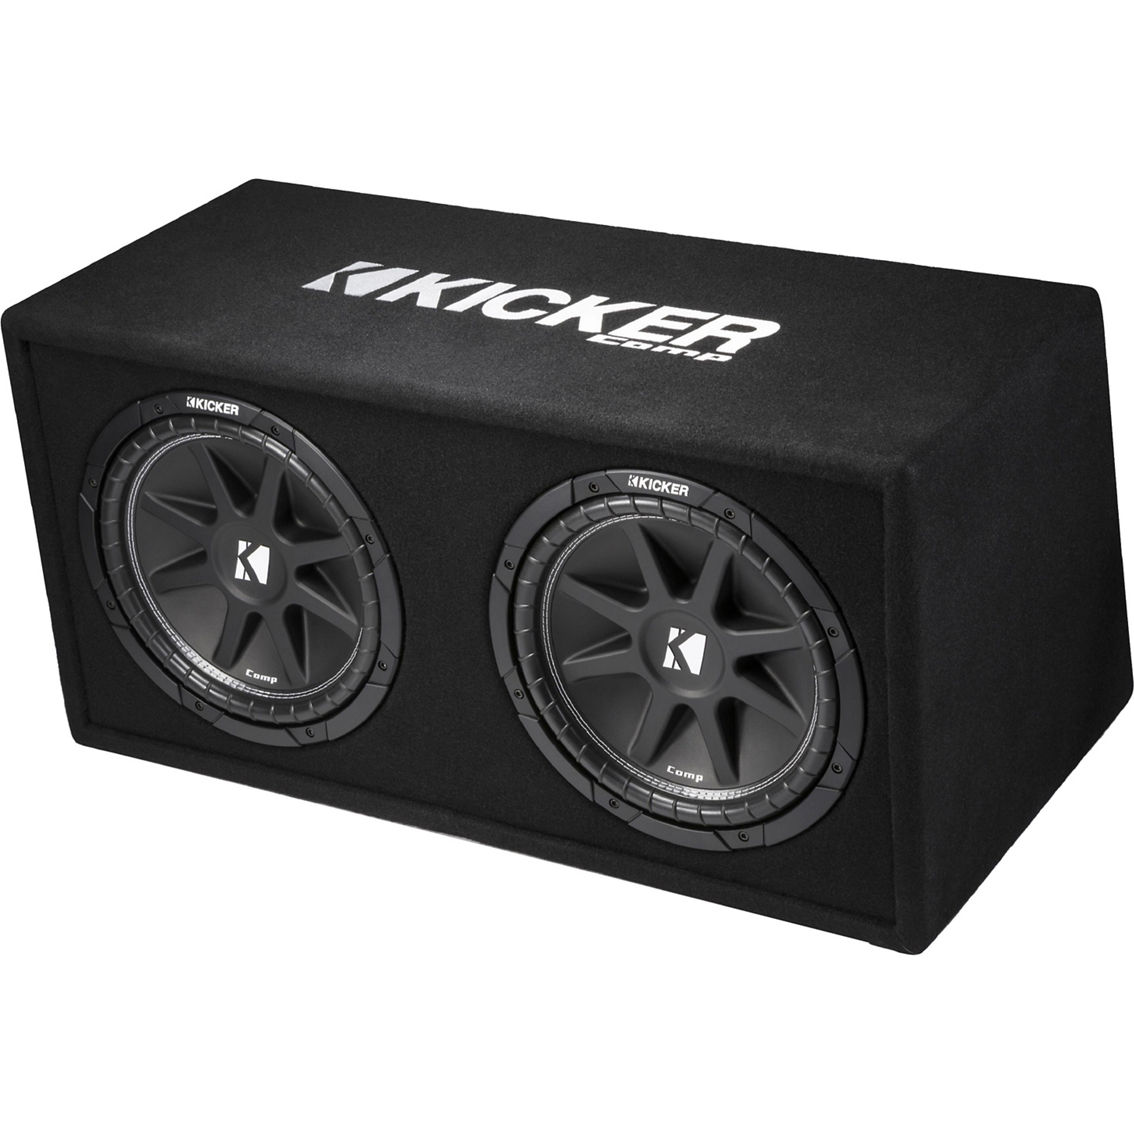 Kicker 43DC122 Ported Enclosure with Dual 12 in. Comp Subwoofers - Image 3 of 5